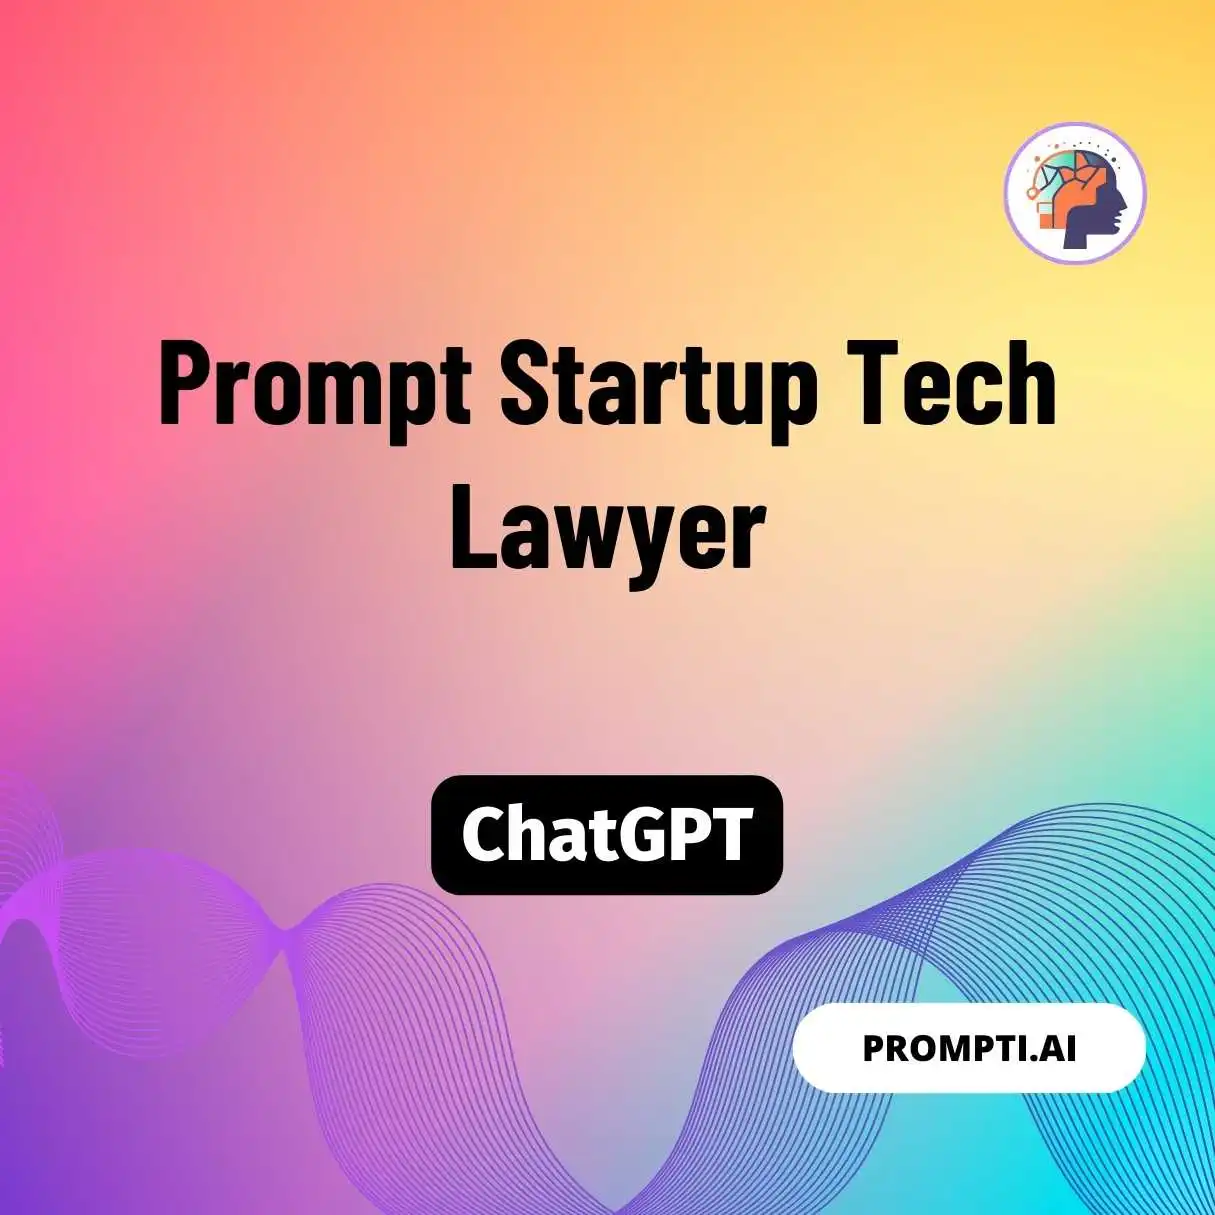 Prompt Startup Tech Lawyer